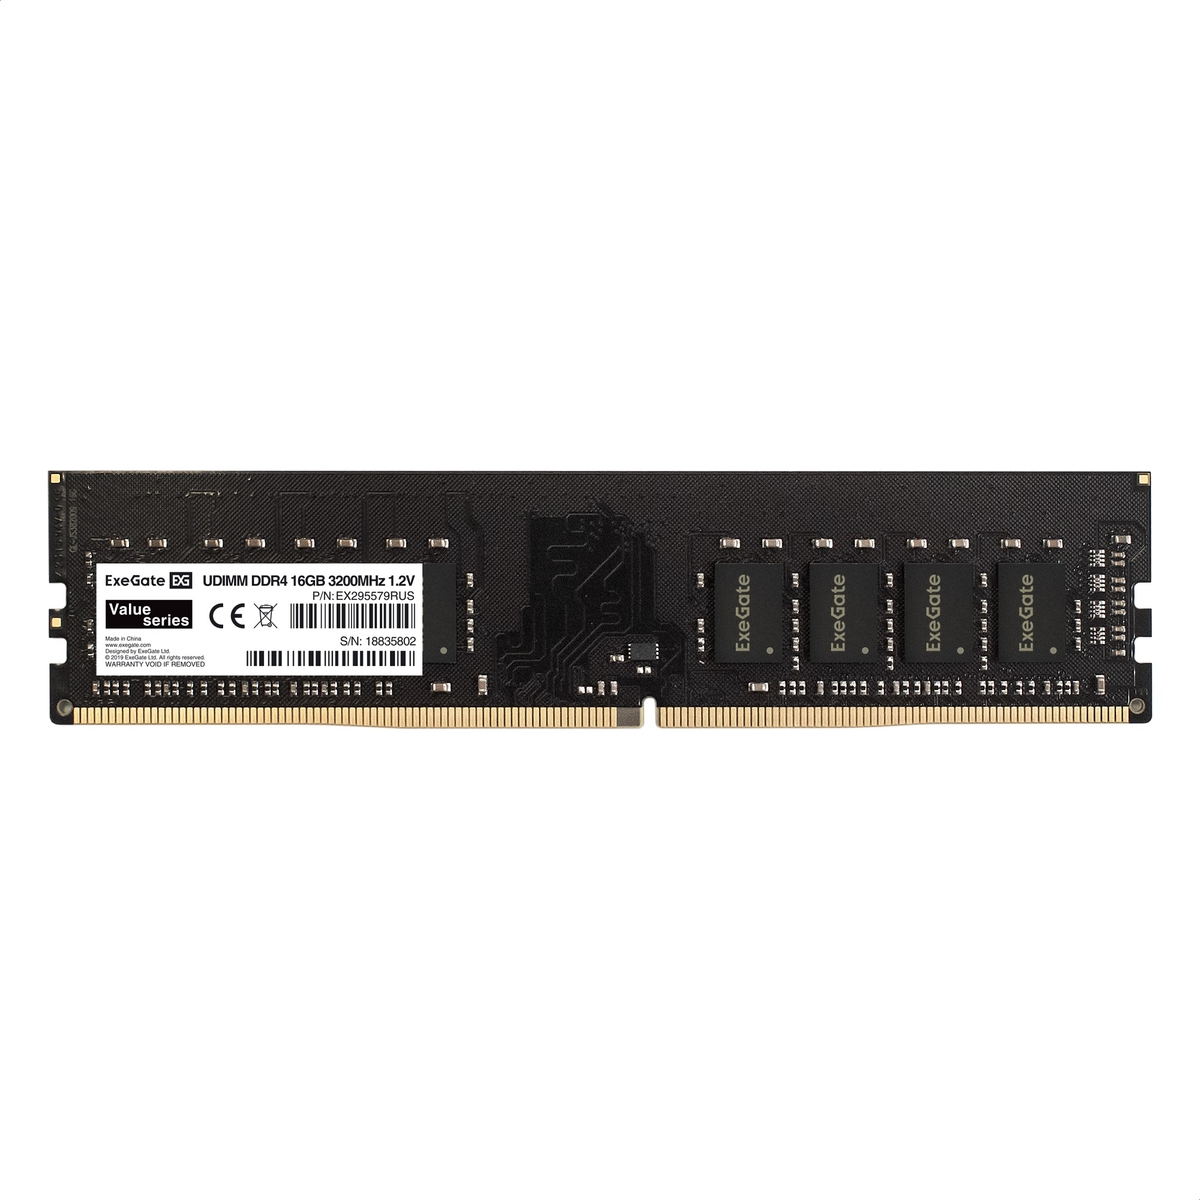 Value DIMM DDR4 16GB <PC4-25600> 3200MHz